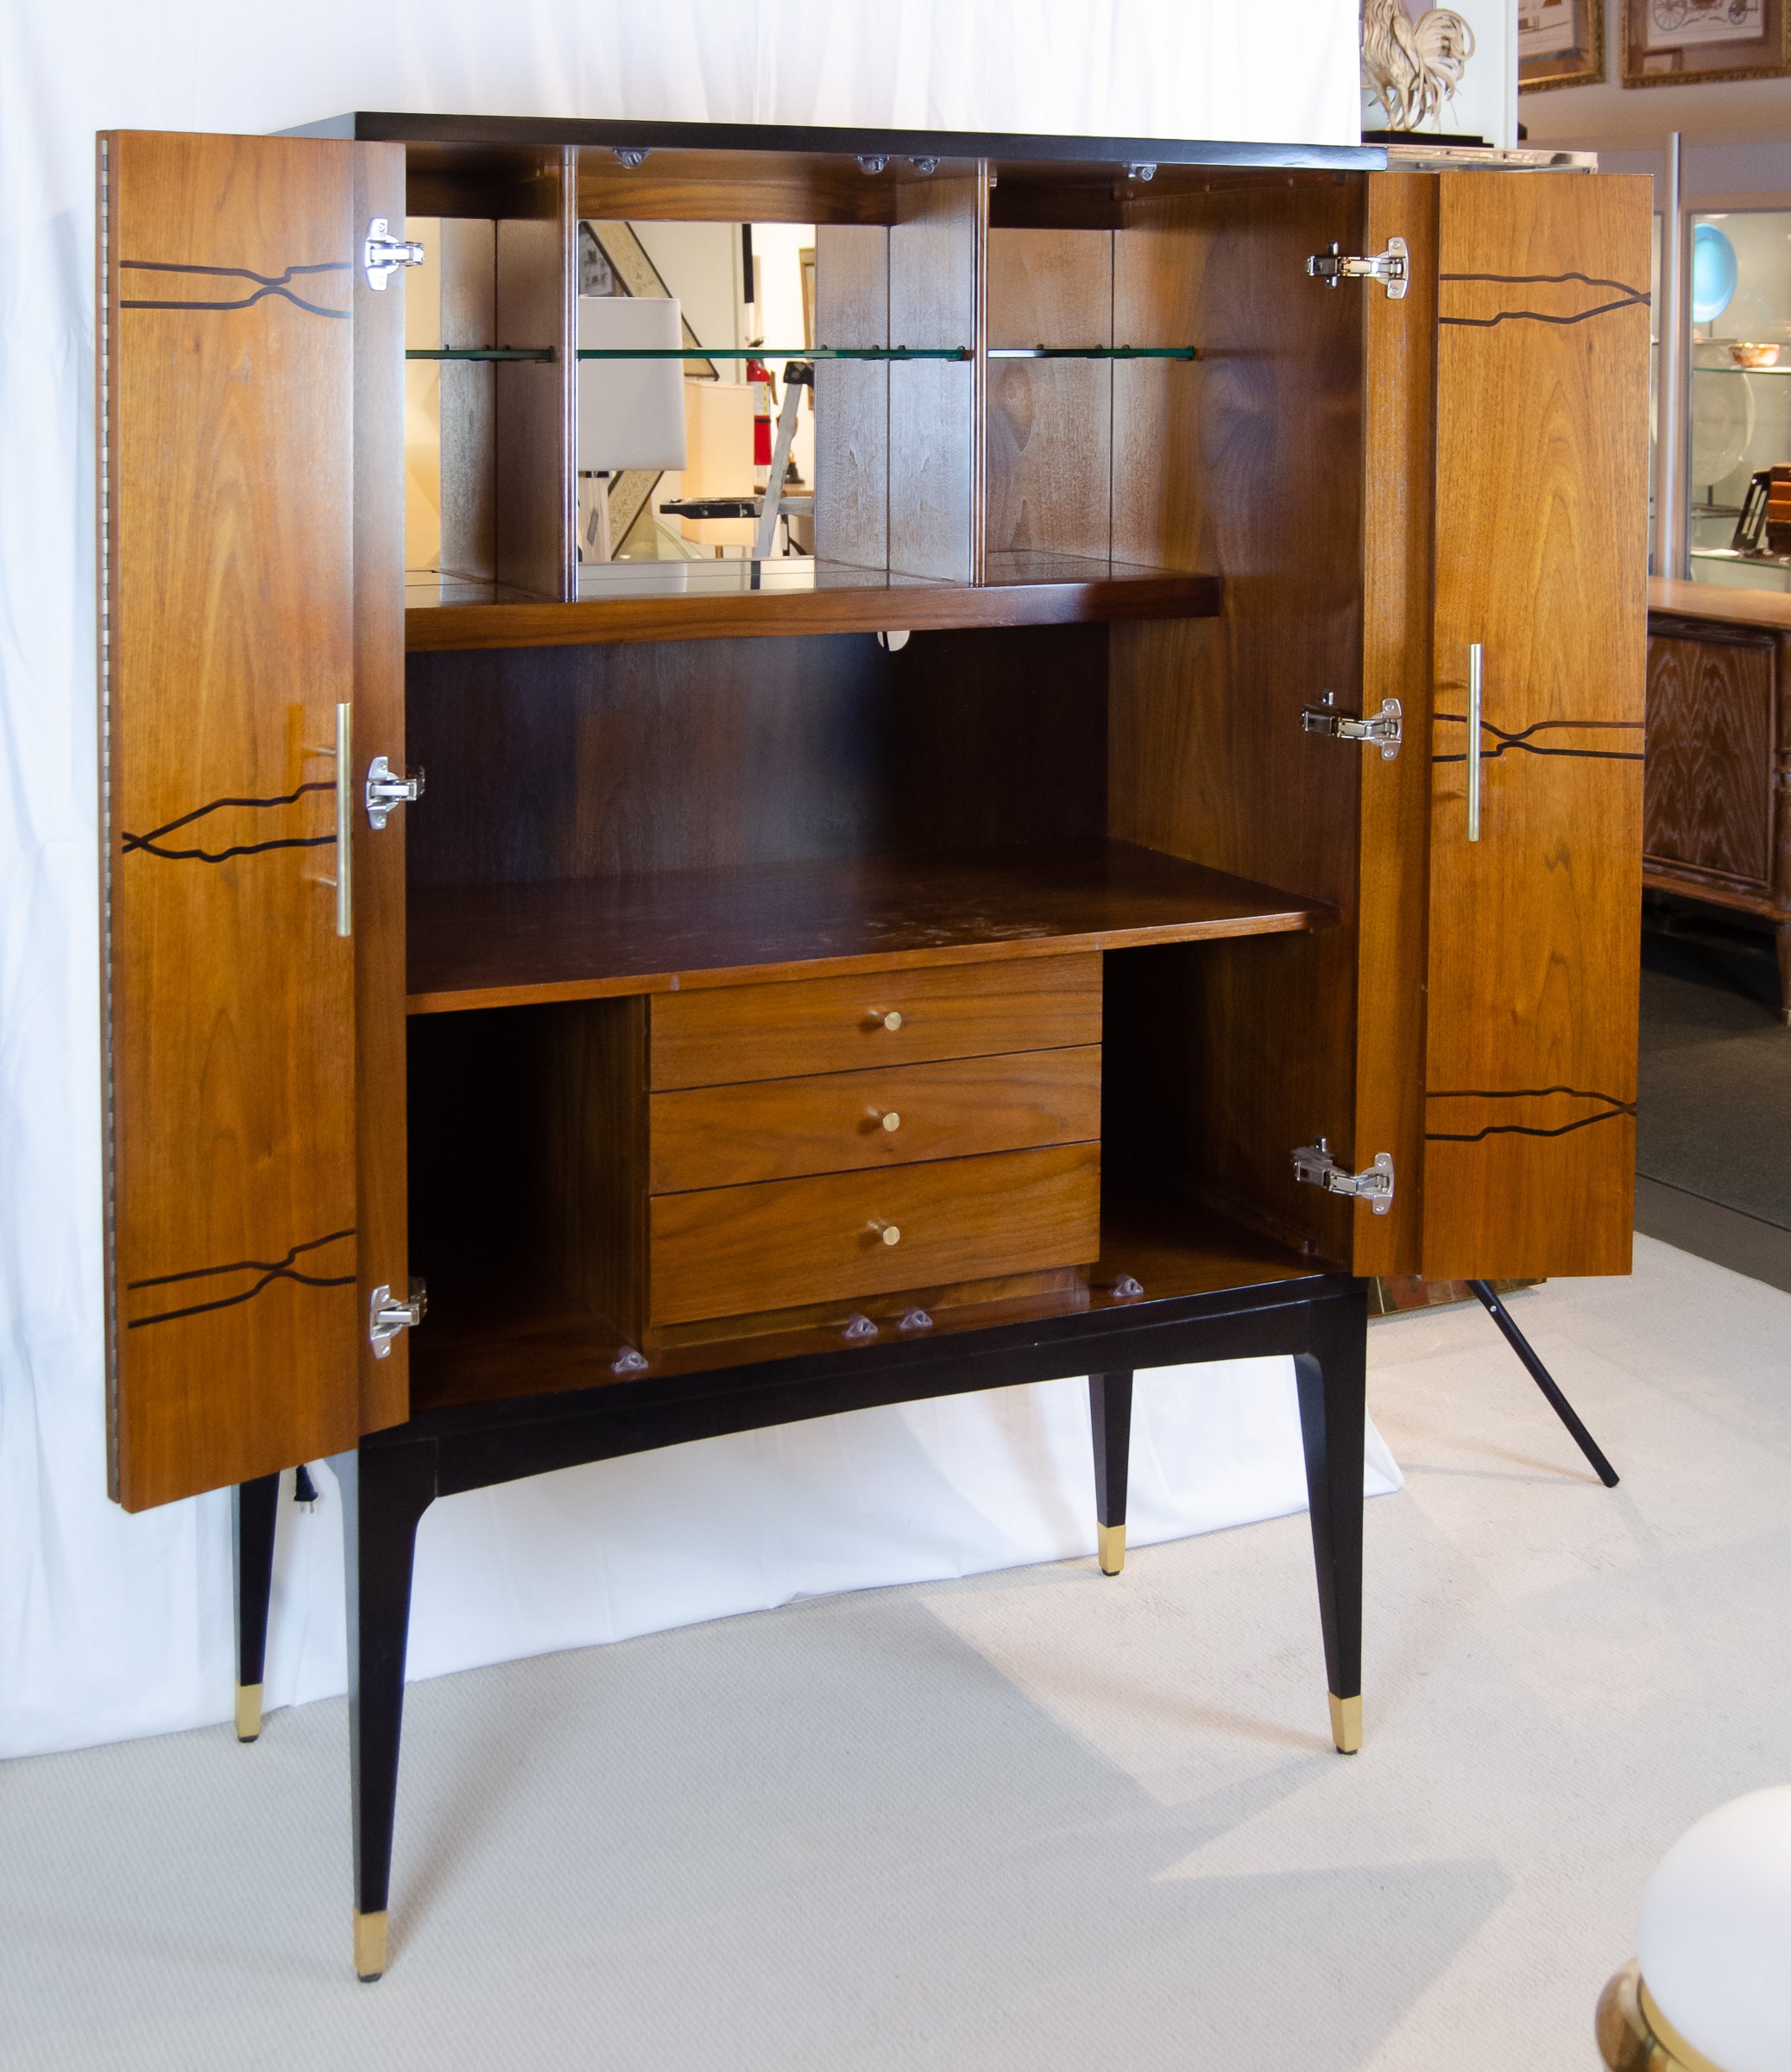 Contemporary Art Deco Influenced Inlaid Wood & Lacquer Bar Cabinet by Brownstone Furniture